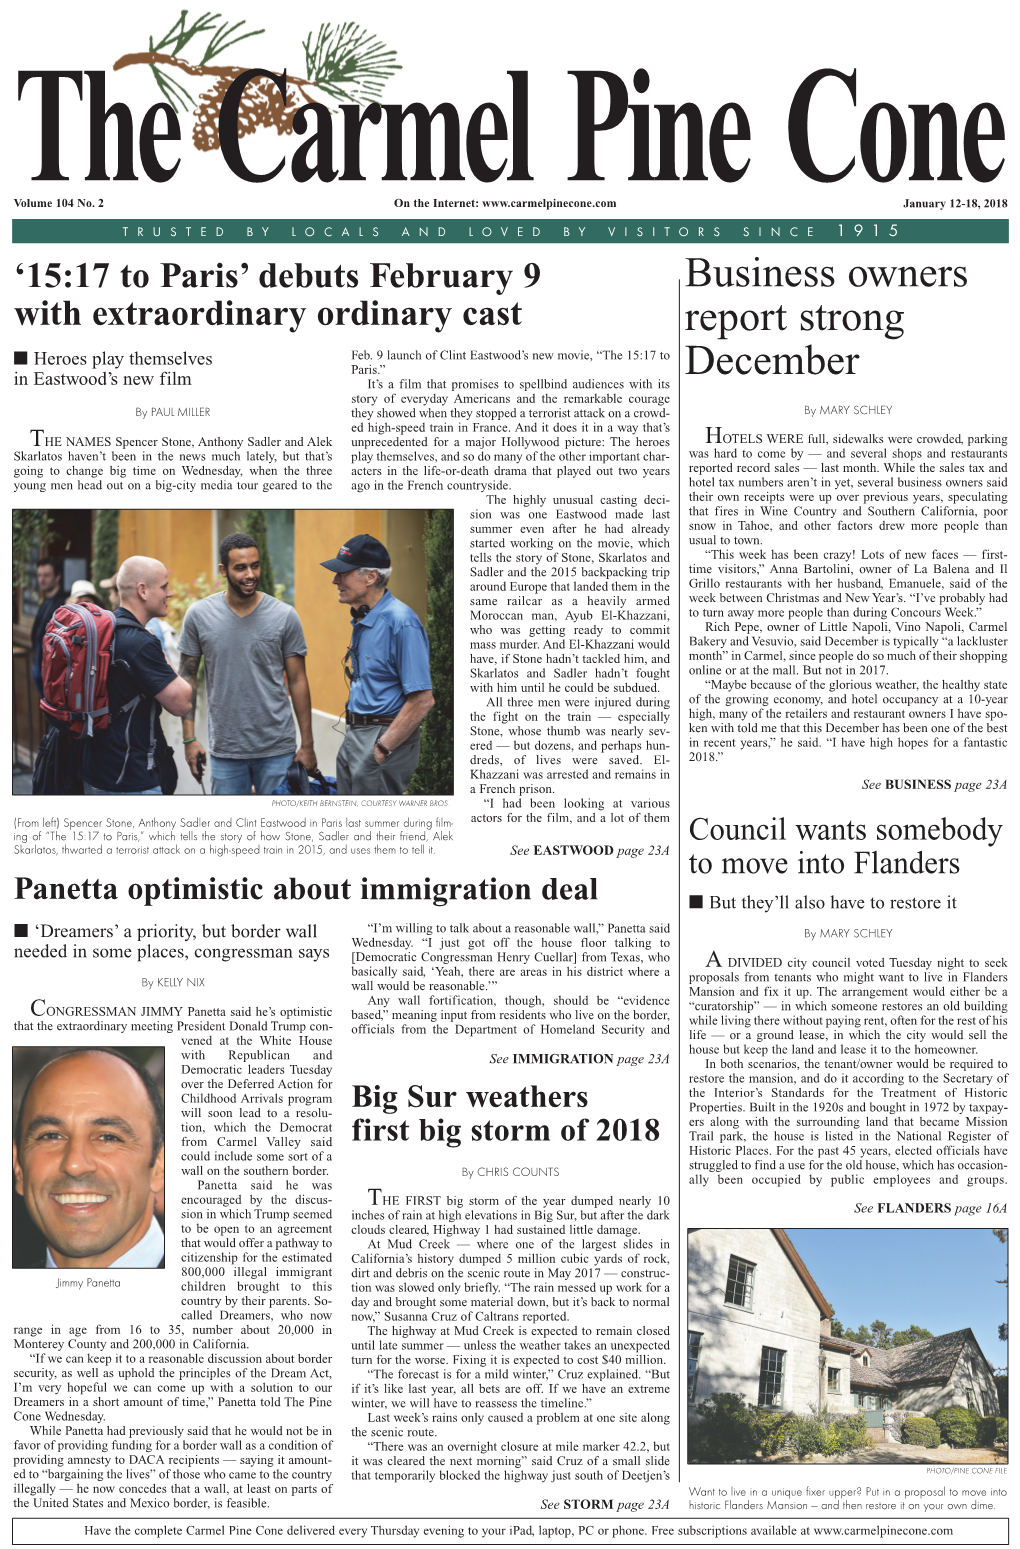 Carmel Pine Cone, January 12, 2018 (Front Page)